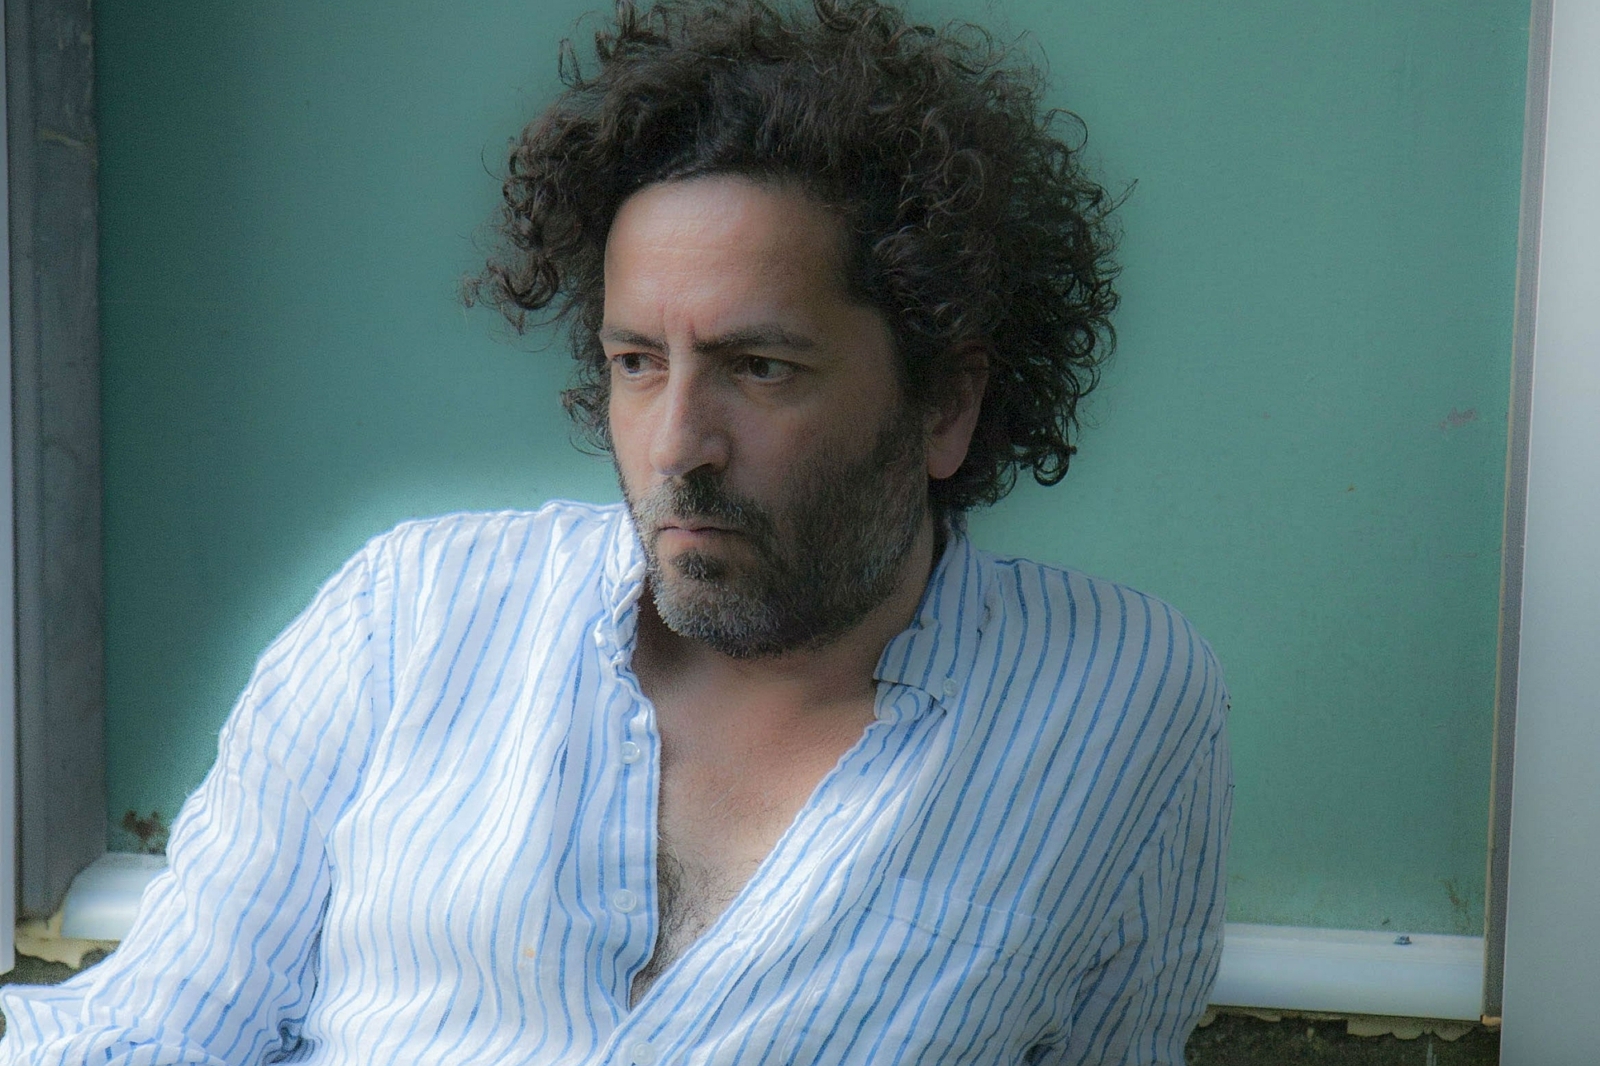 Destroyer shares new track ‘Cover From The Sun’